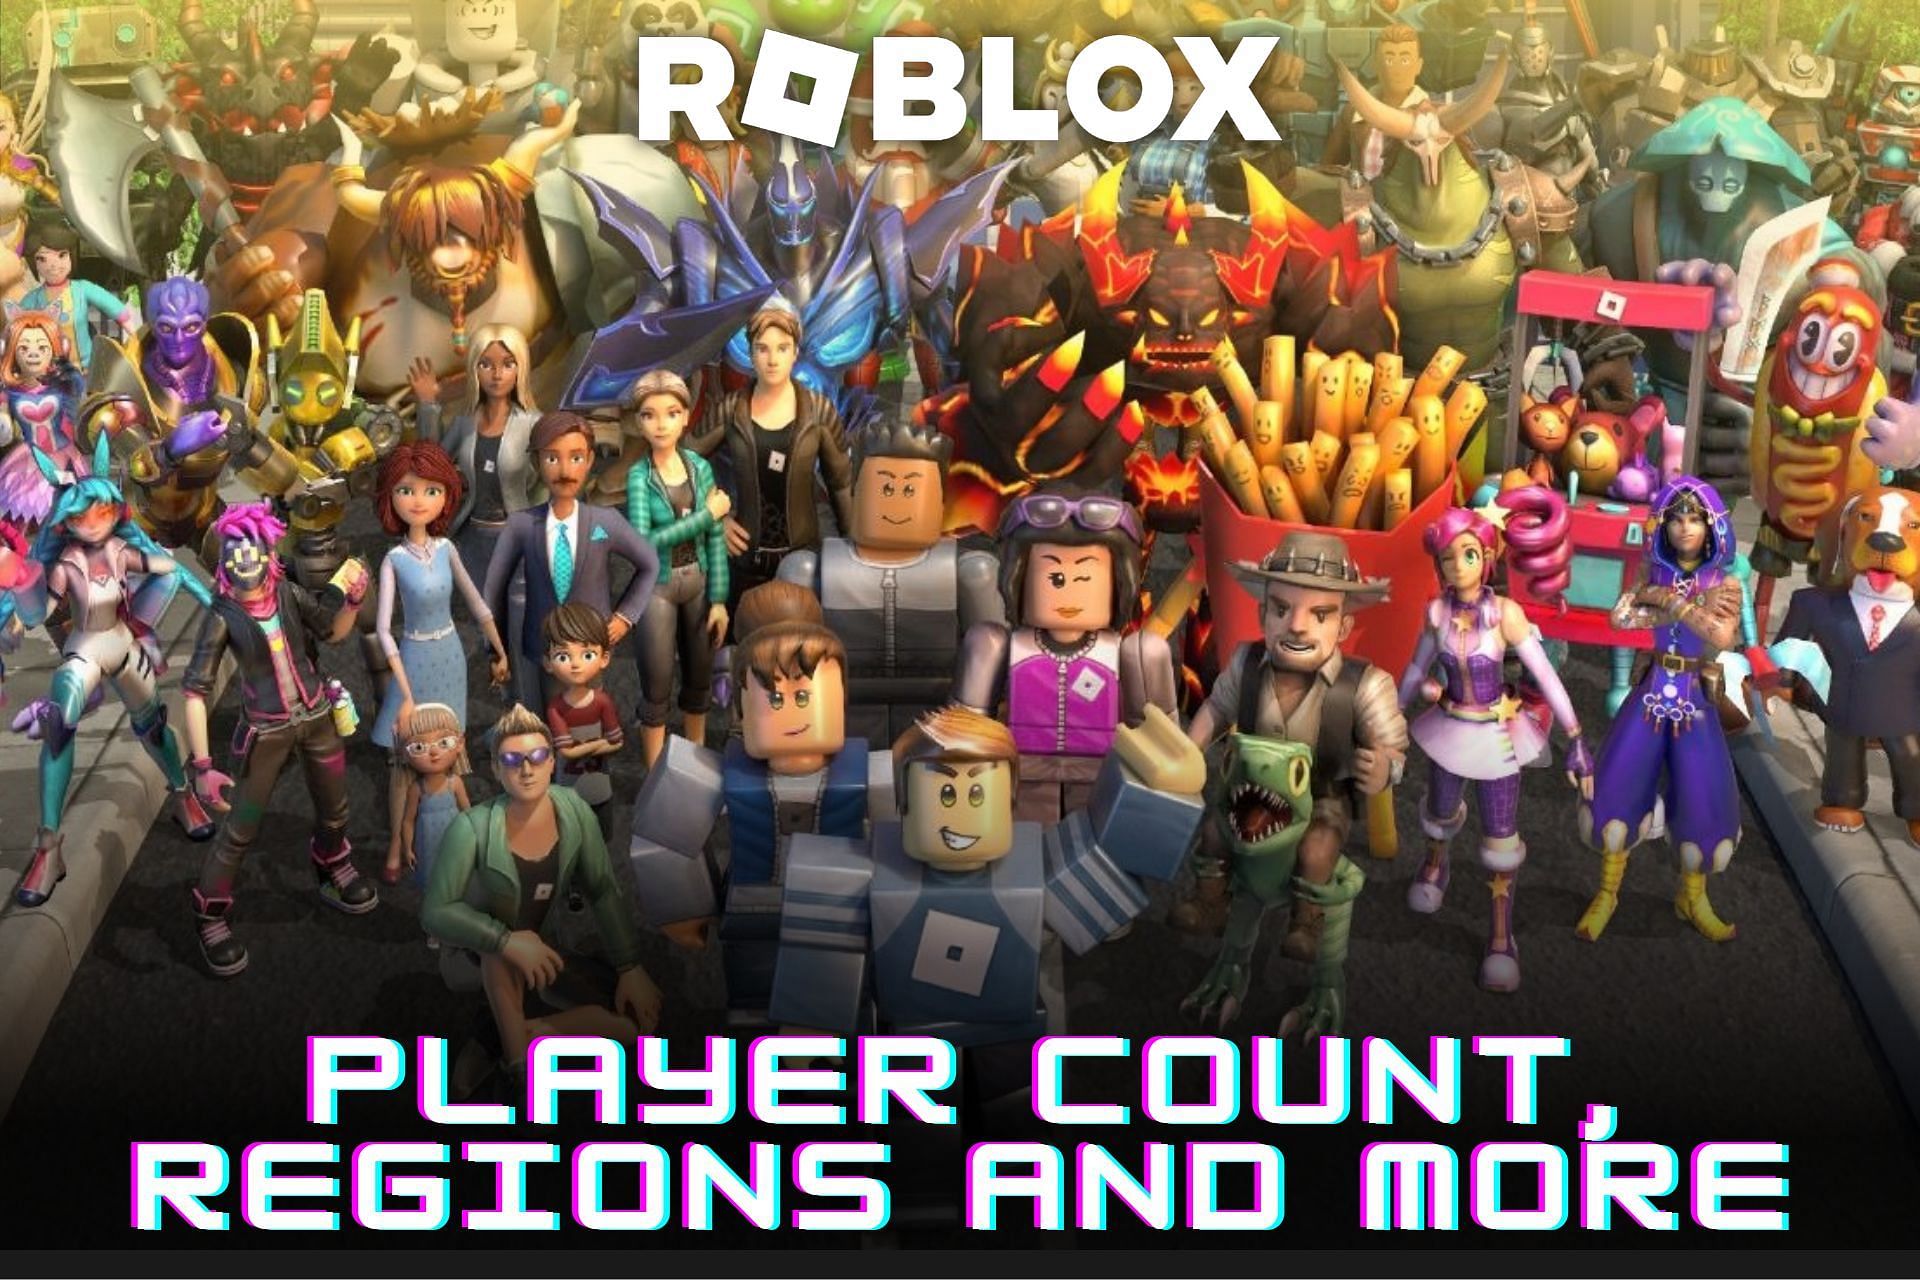 Roblox Statistics About Revenue, Players, and Developers